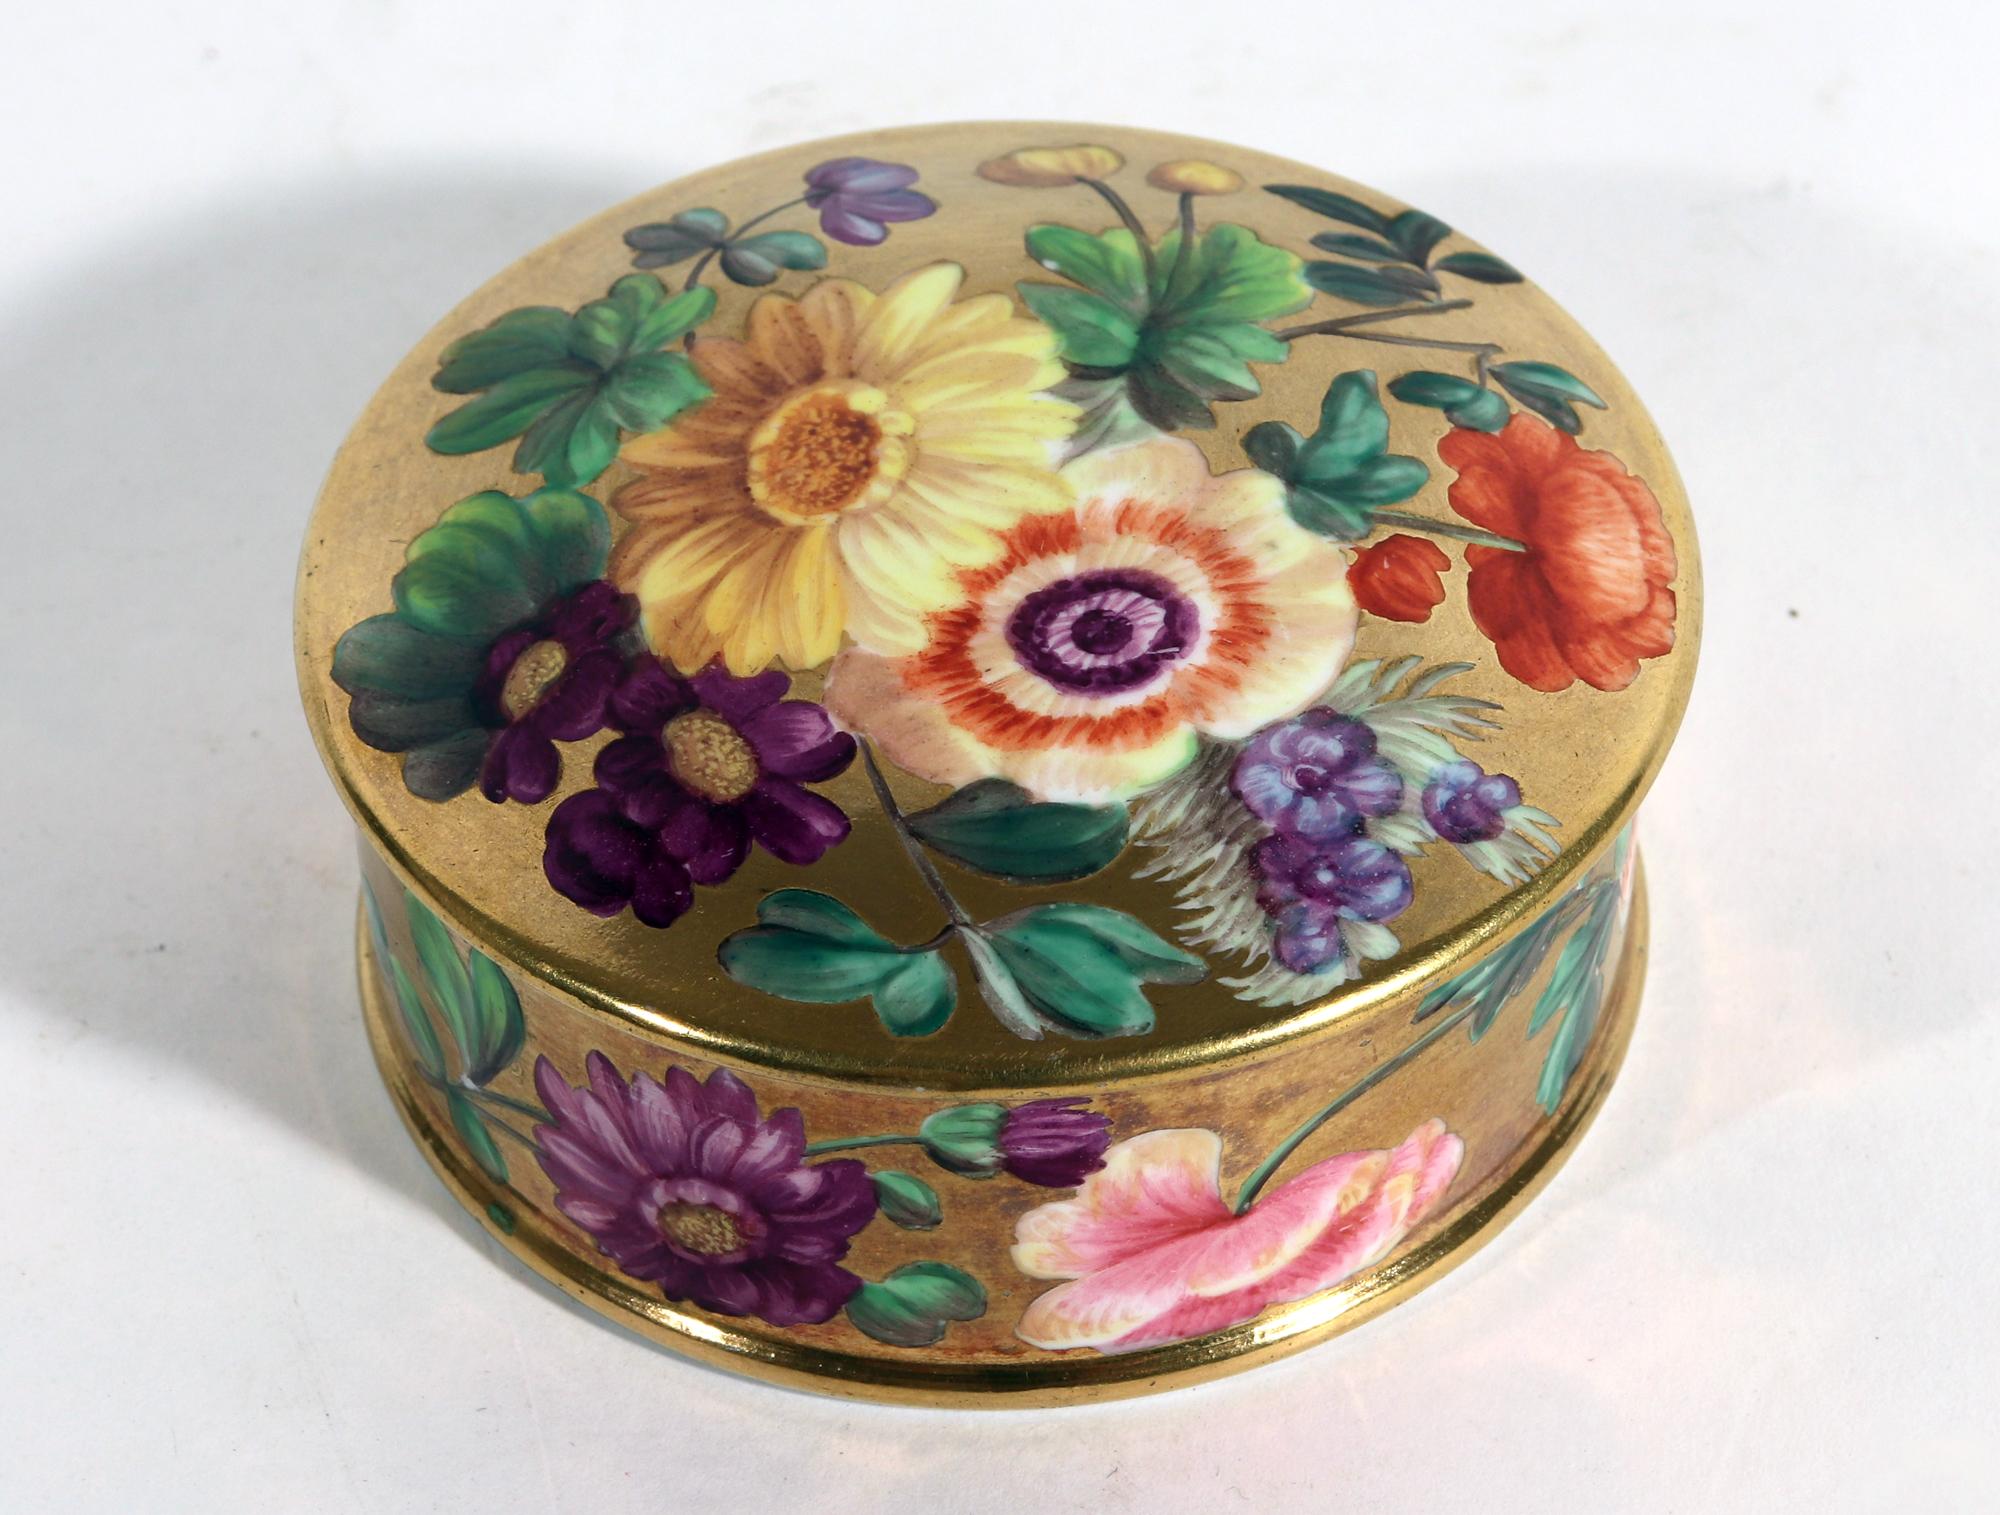 Regency English Porcelain Patch Box with Irish References, 